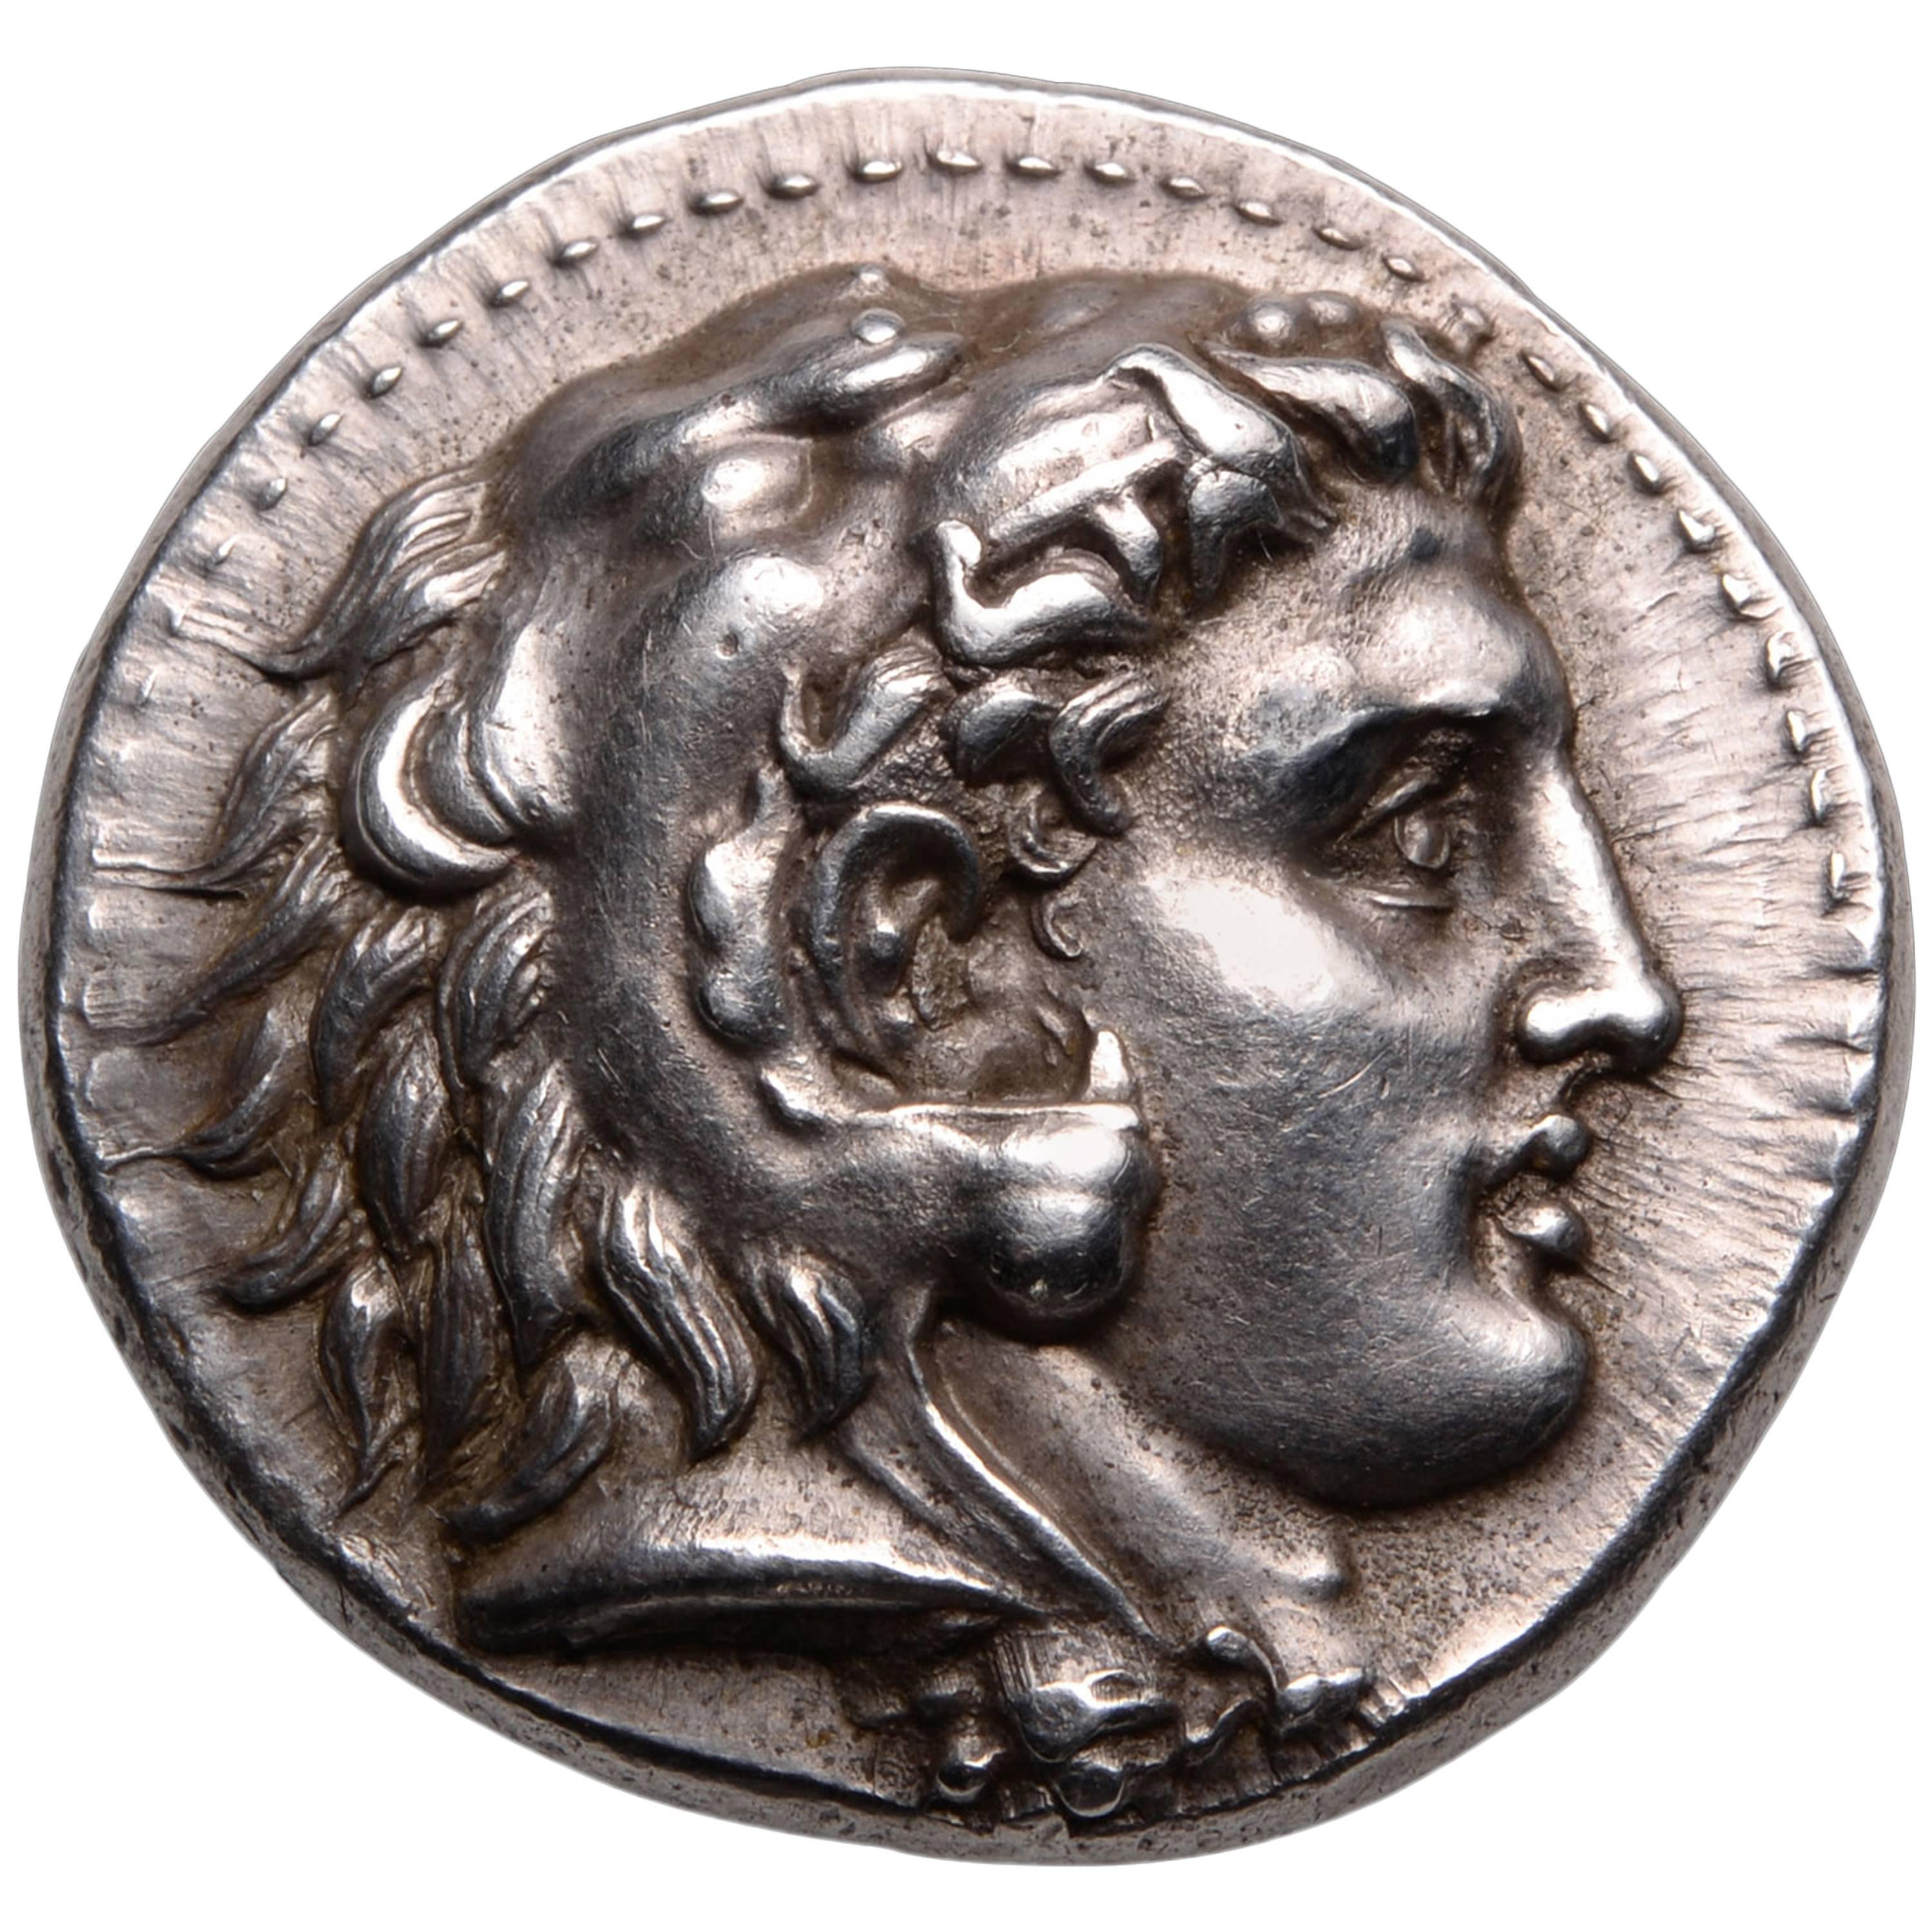 Ancient Greek Silver Tetradrachm Coin of Alexander the Great, 323 BC